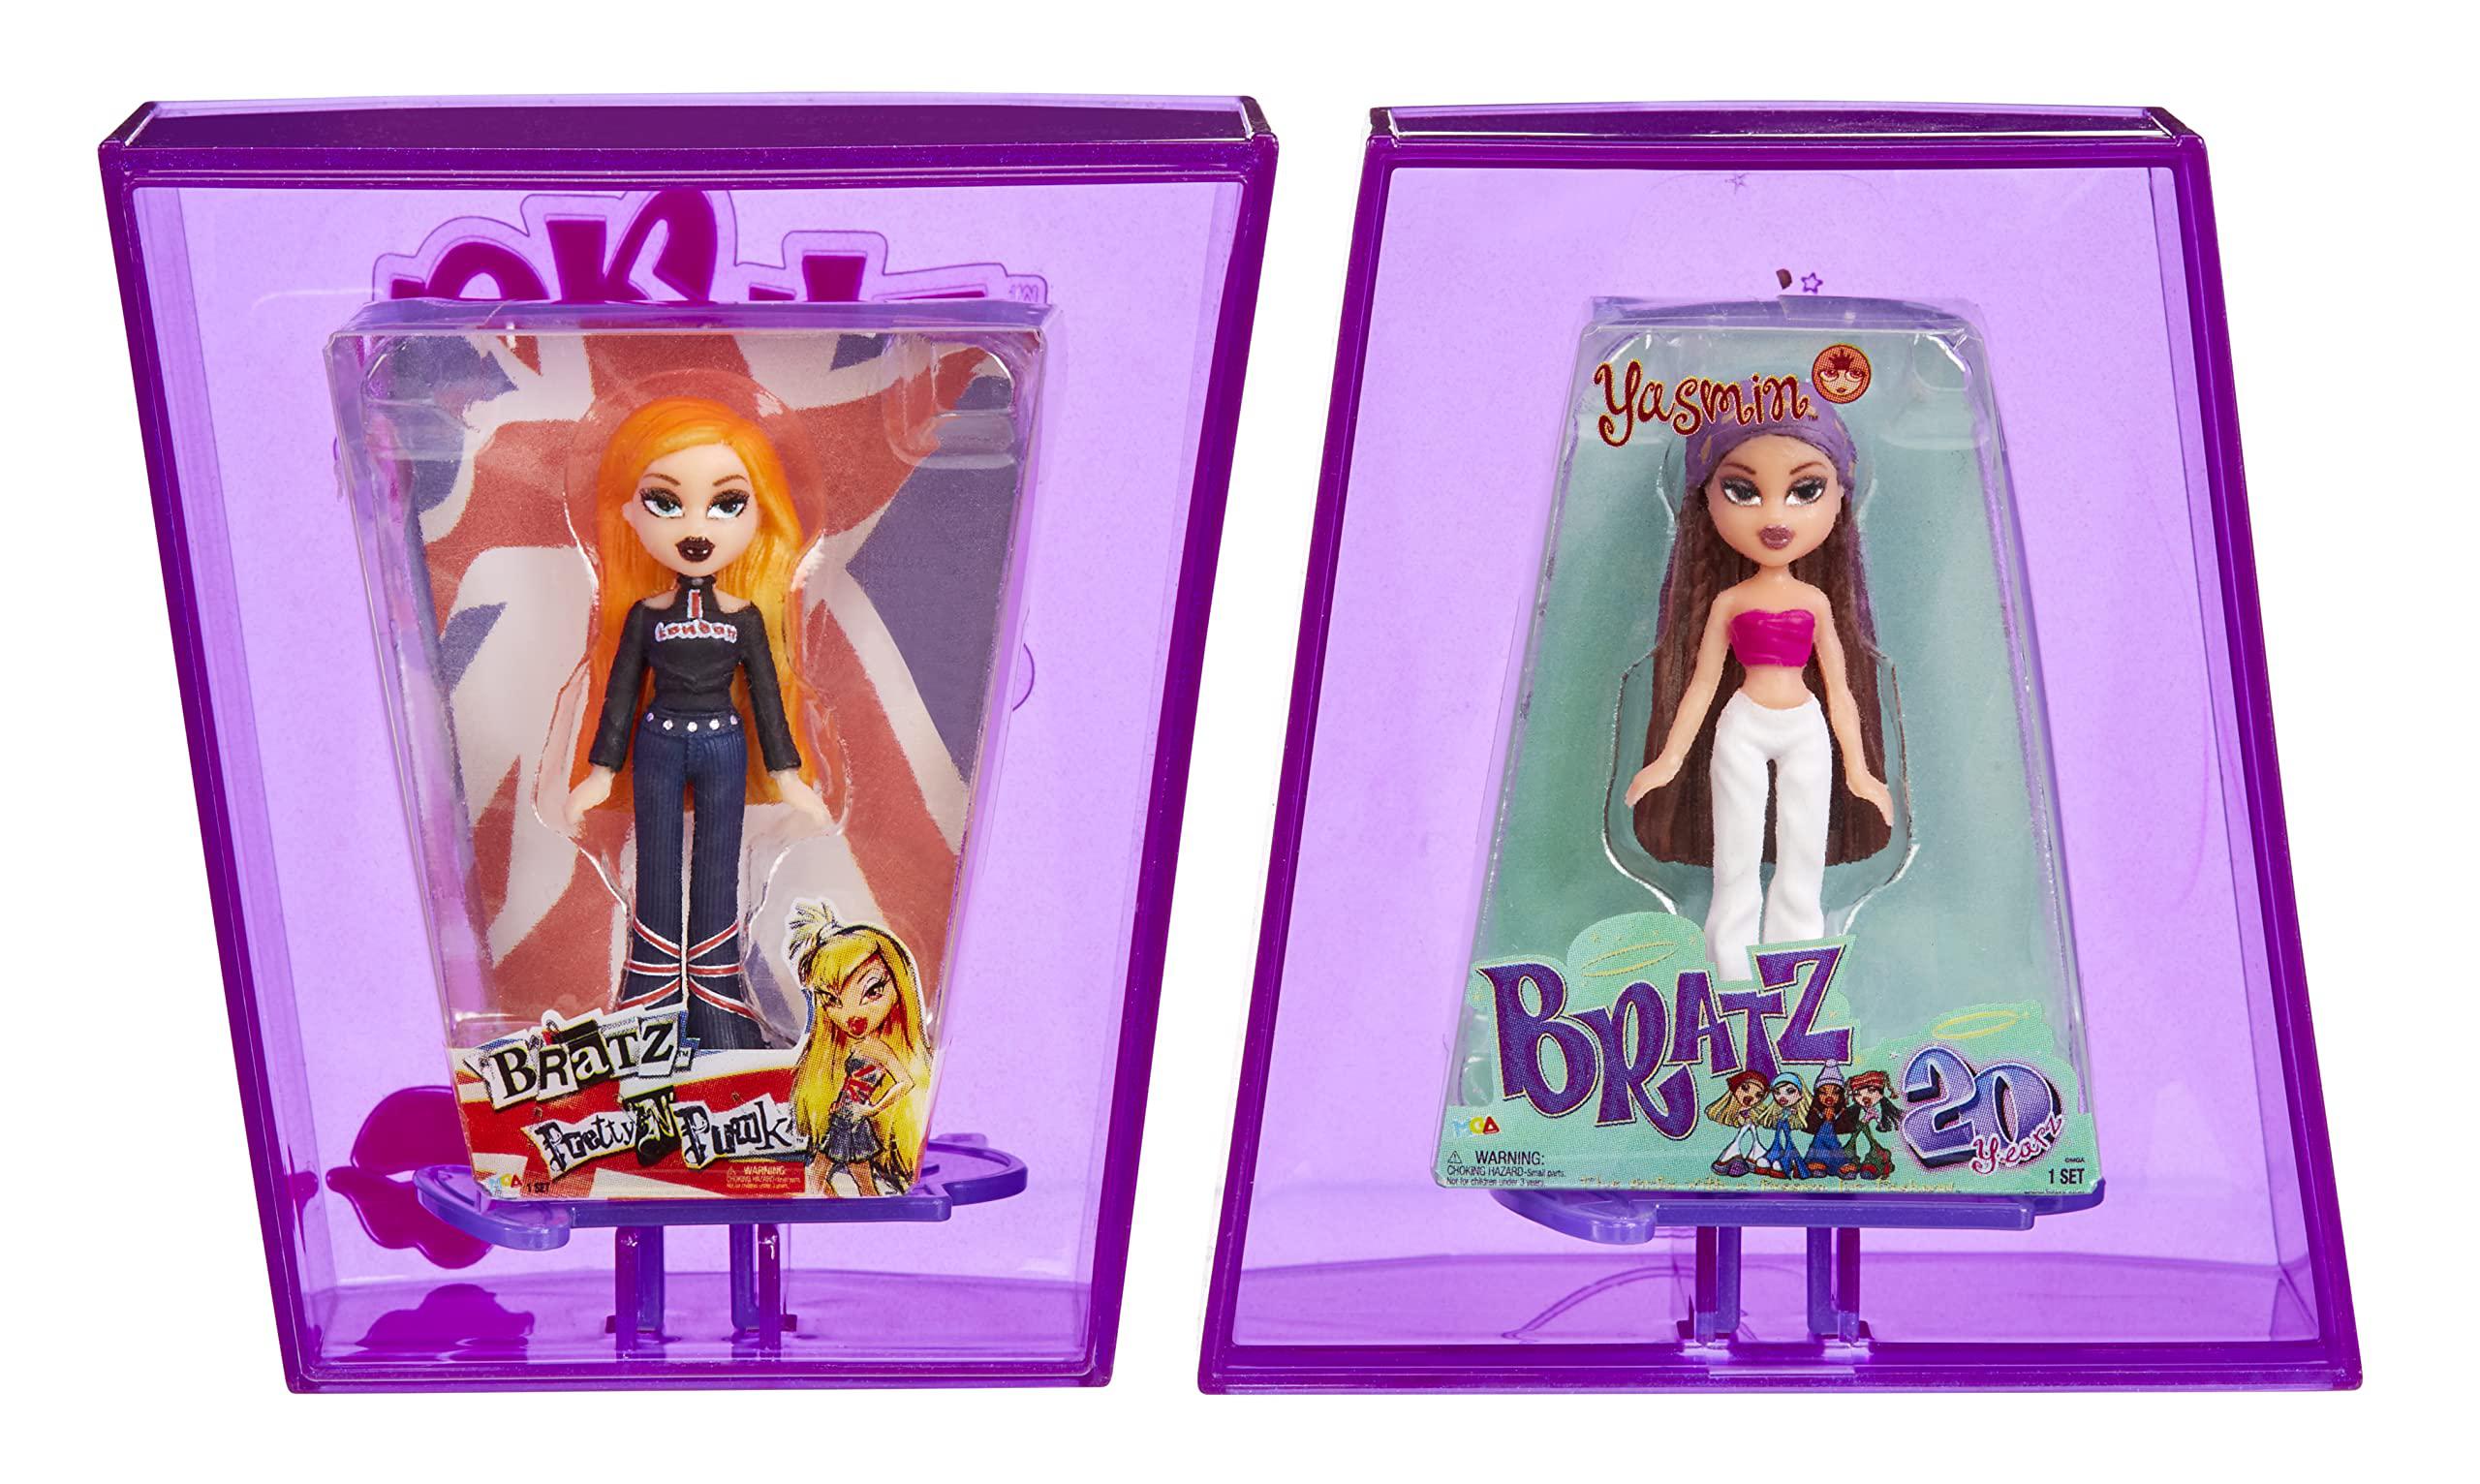 mga\'s miniverse mga's miniverse bratz minis - 2 bratz minis in each pack, blind packaging doubles as display, y2k nostalgia, collectors ages 